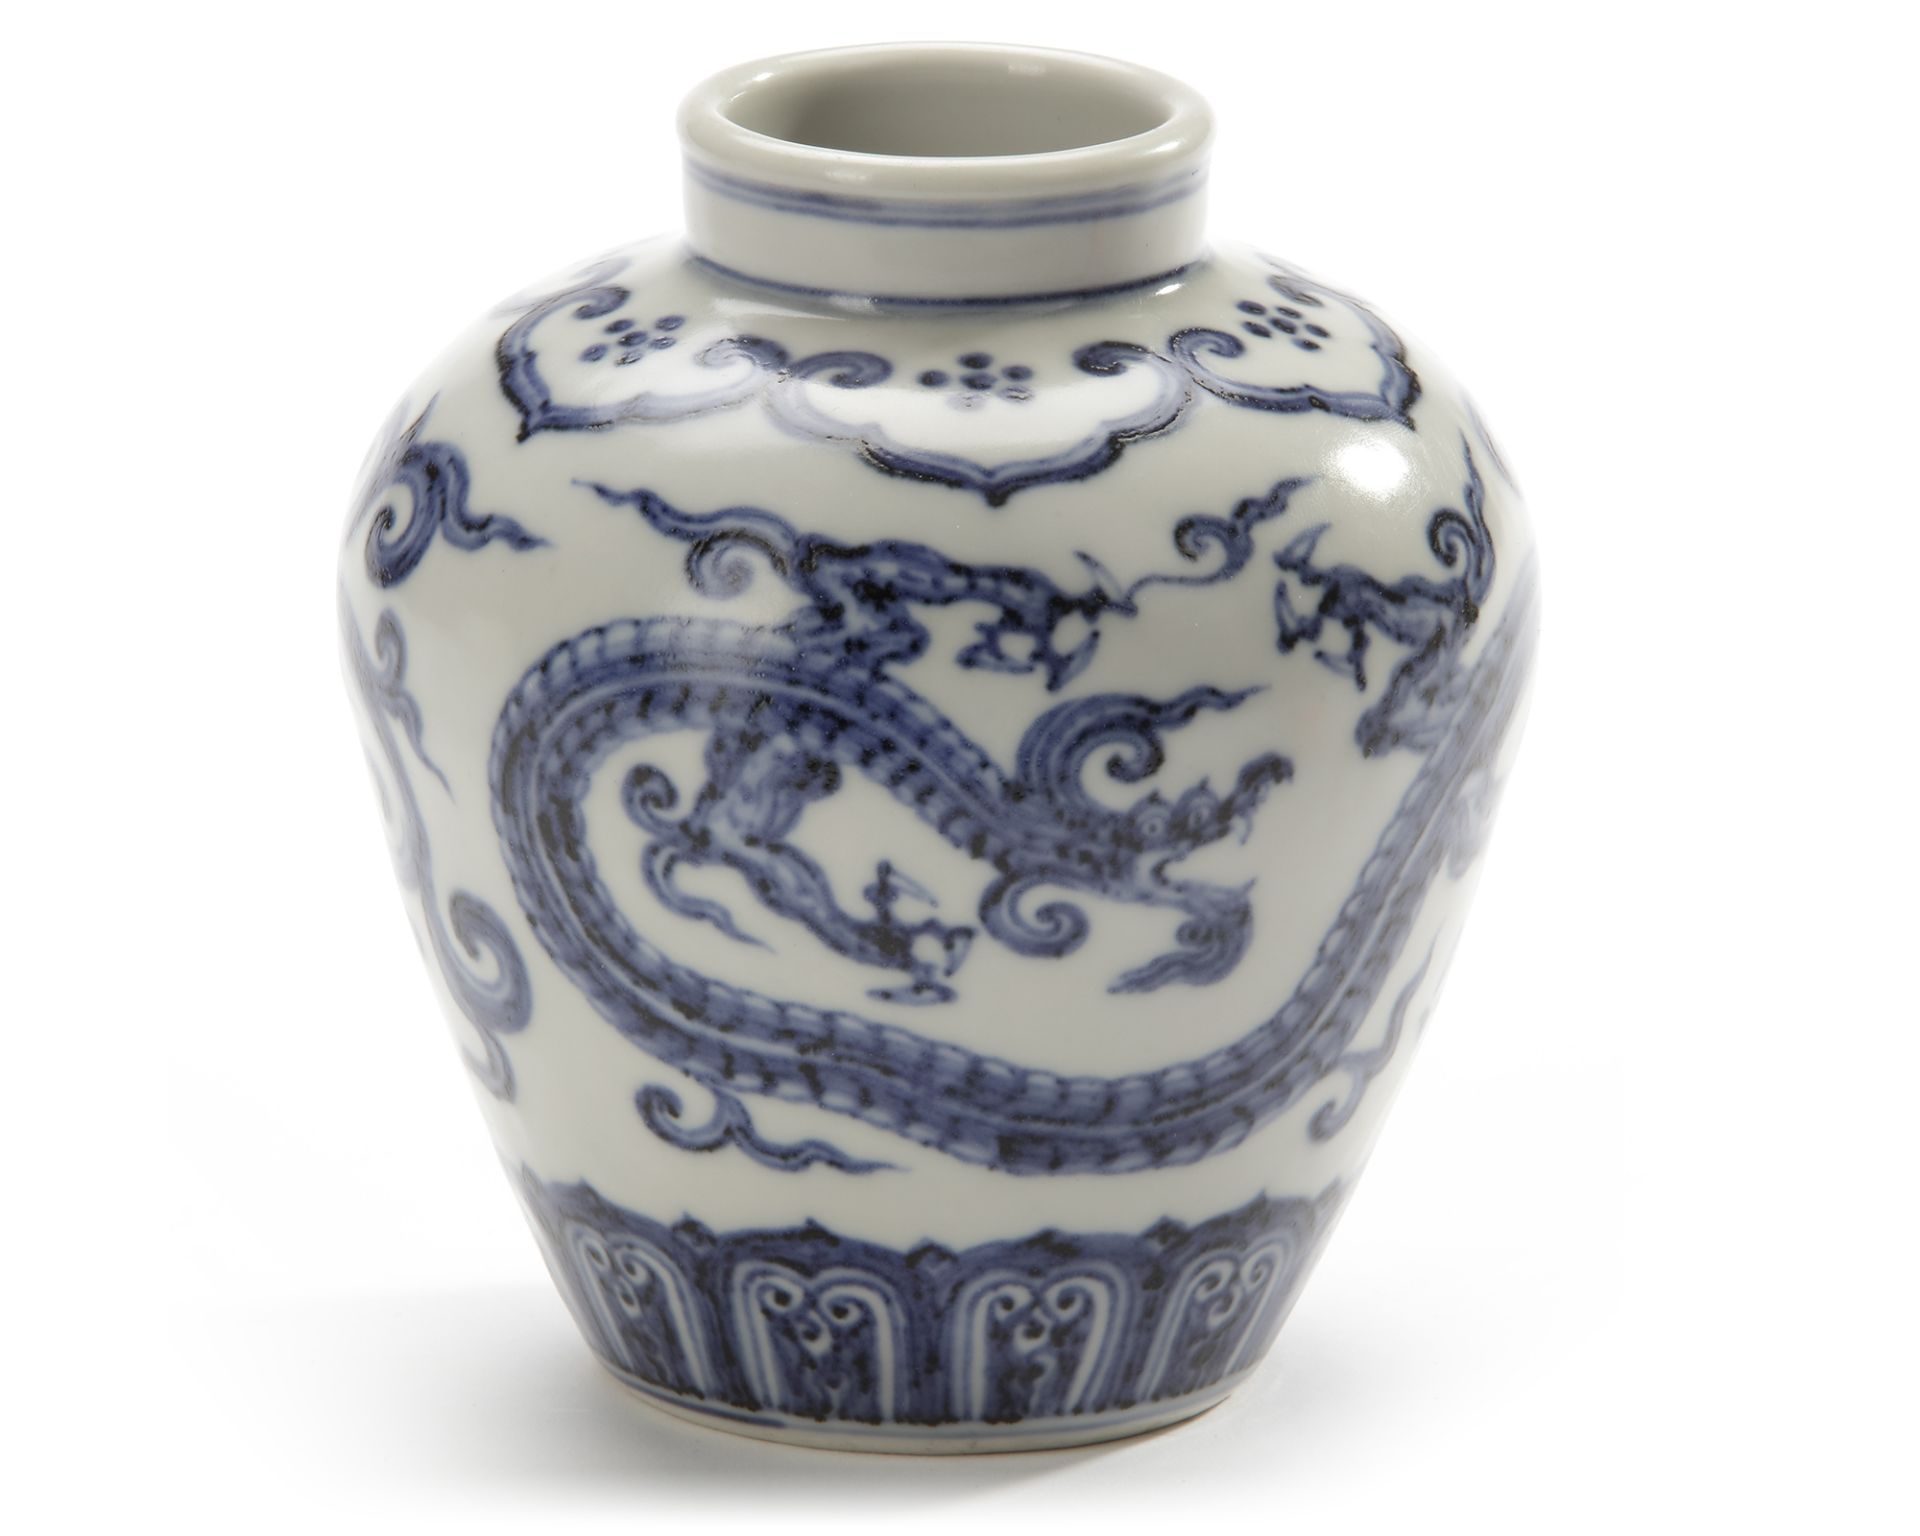 A SMALL CHINESE BLUE AND WHITE DRAGONS JAR, MING DYNASTY (1368-1644) - Image 2 of 4